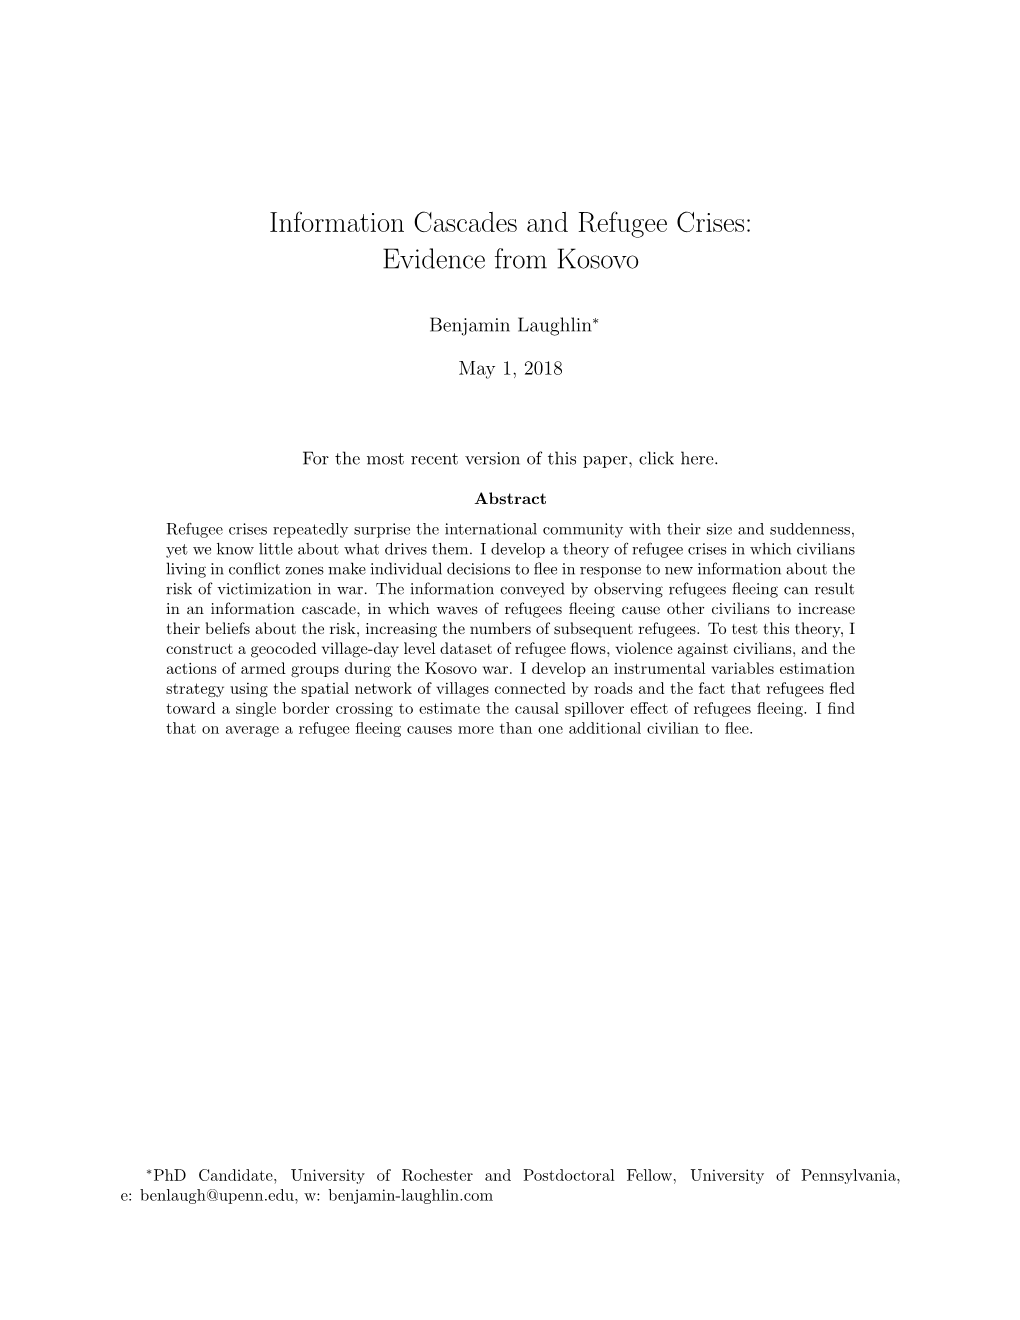 Information Cascades and Refugee Crises: Evidence from Kosovo